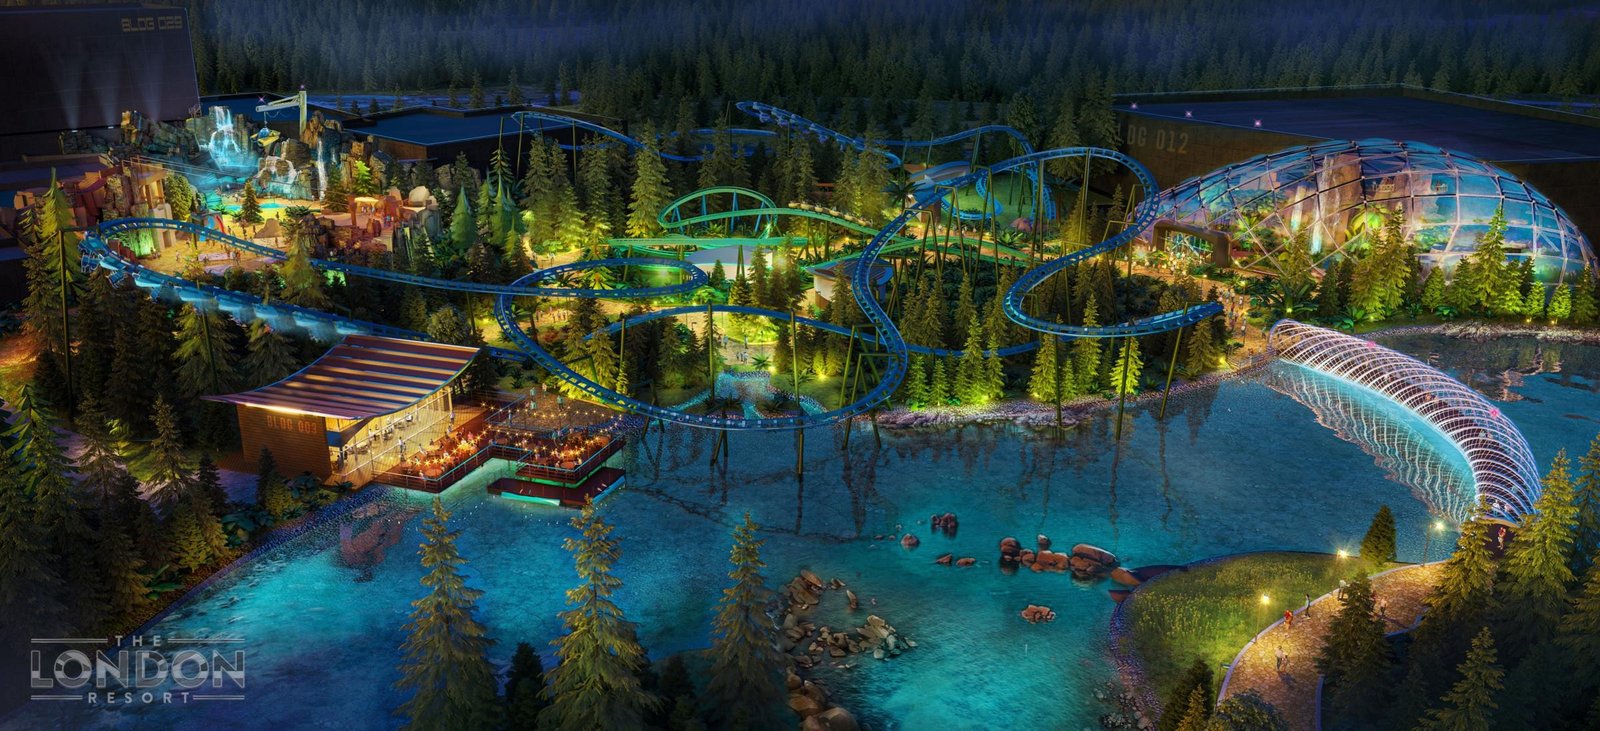 The new roller coaster at London Resorts